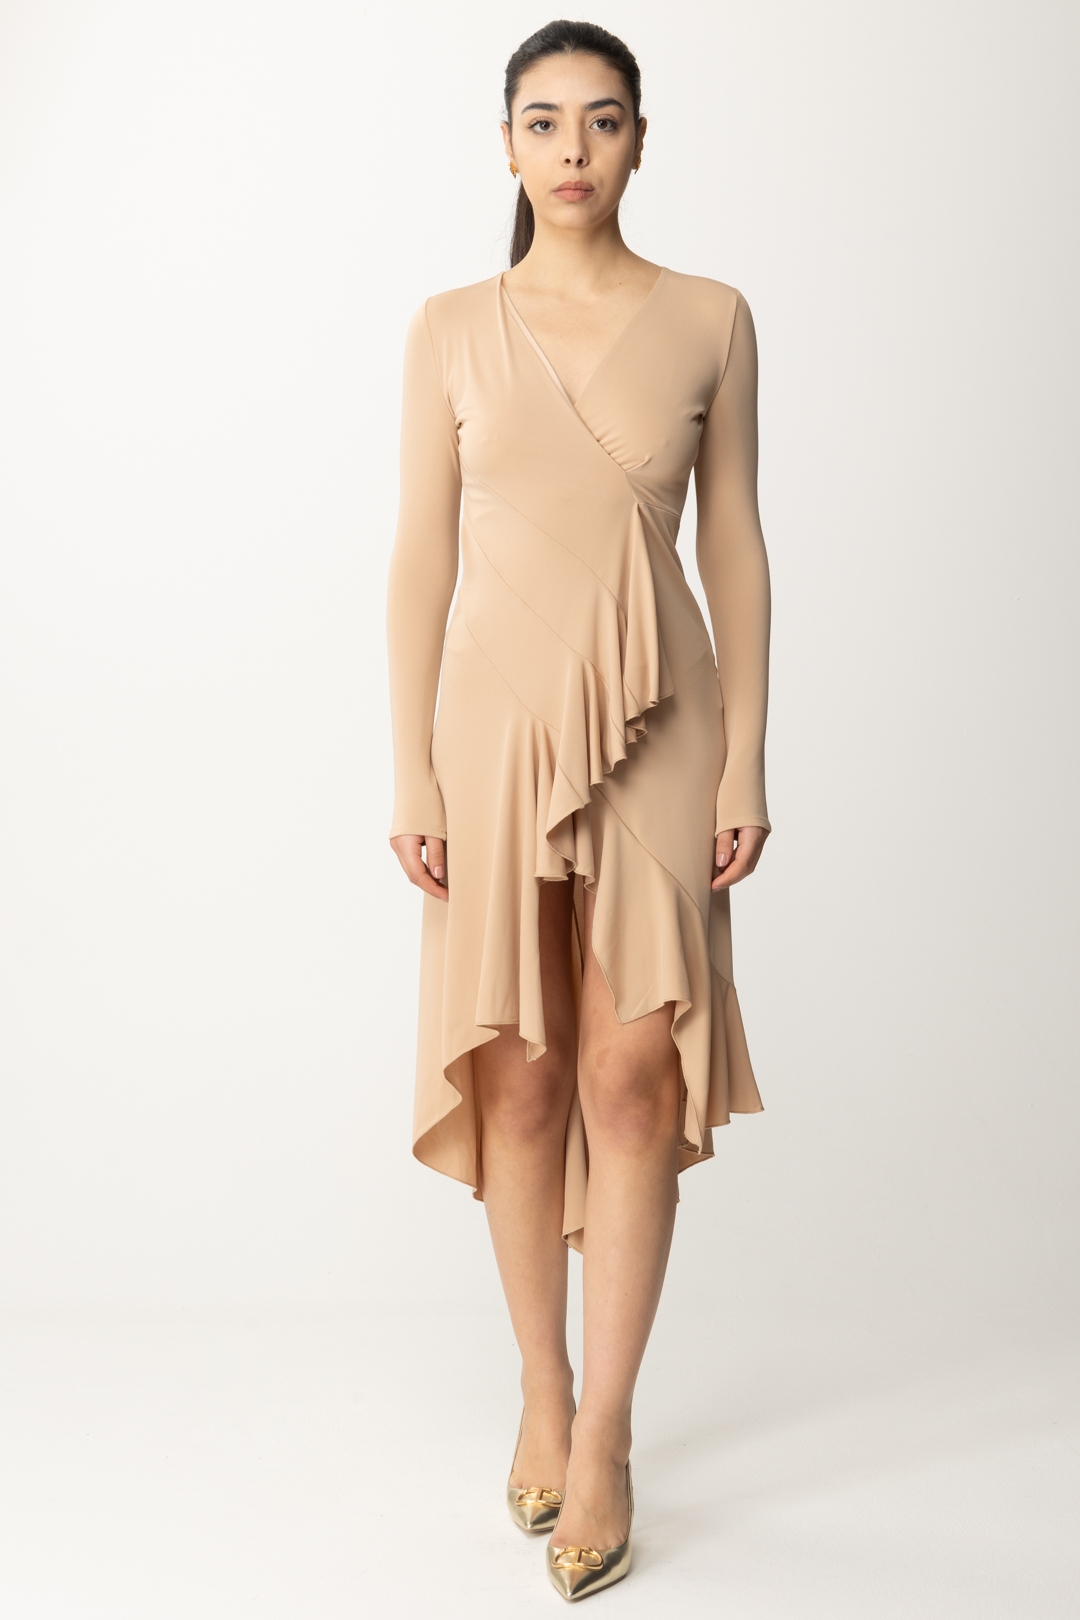 Preview: Aniye By Asymmetric Dress with Ruches Sienna SKIN